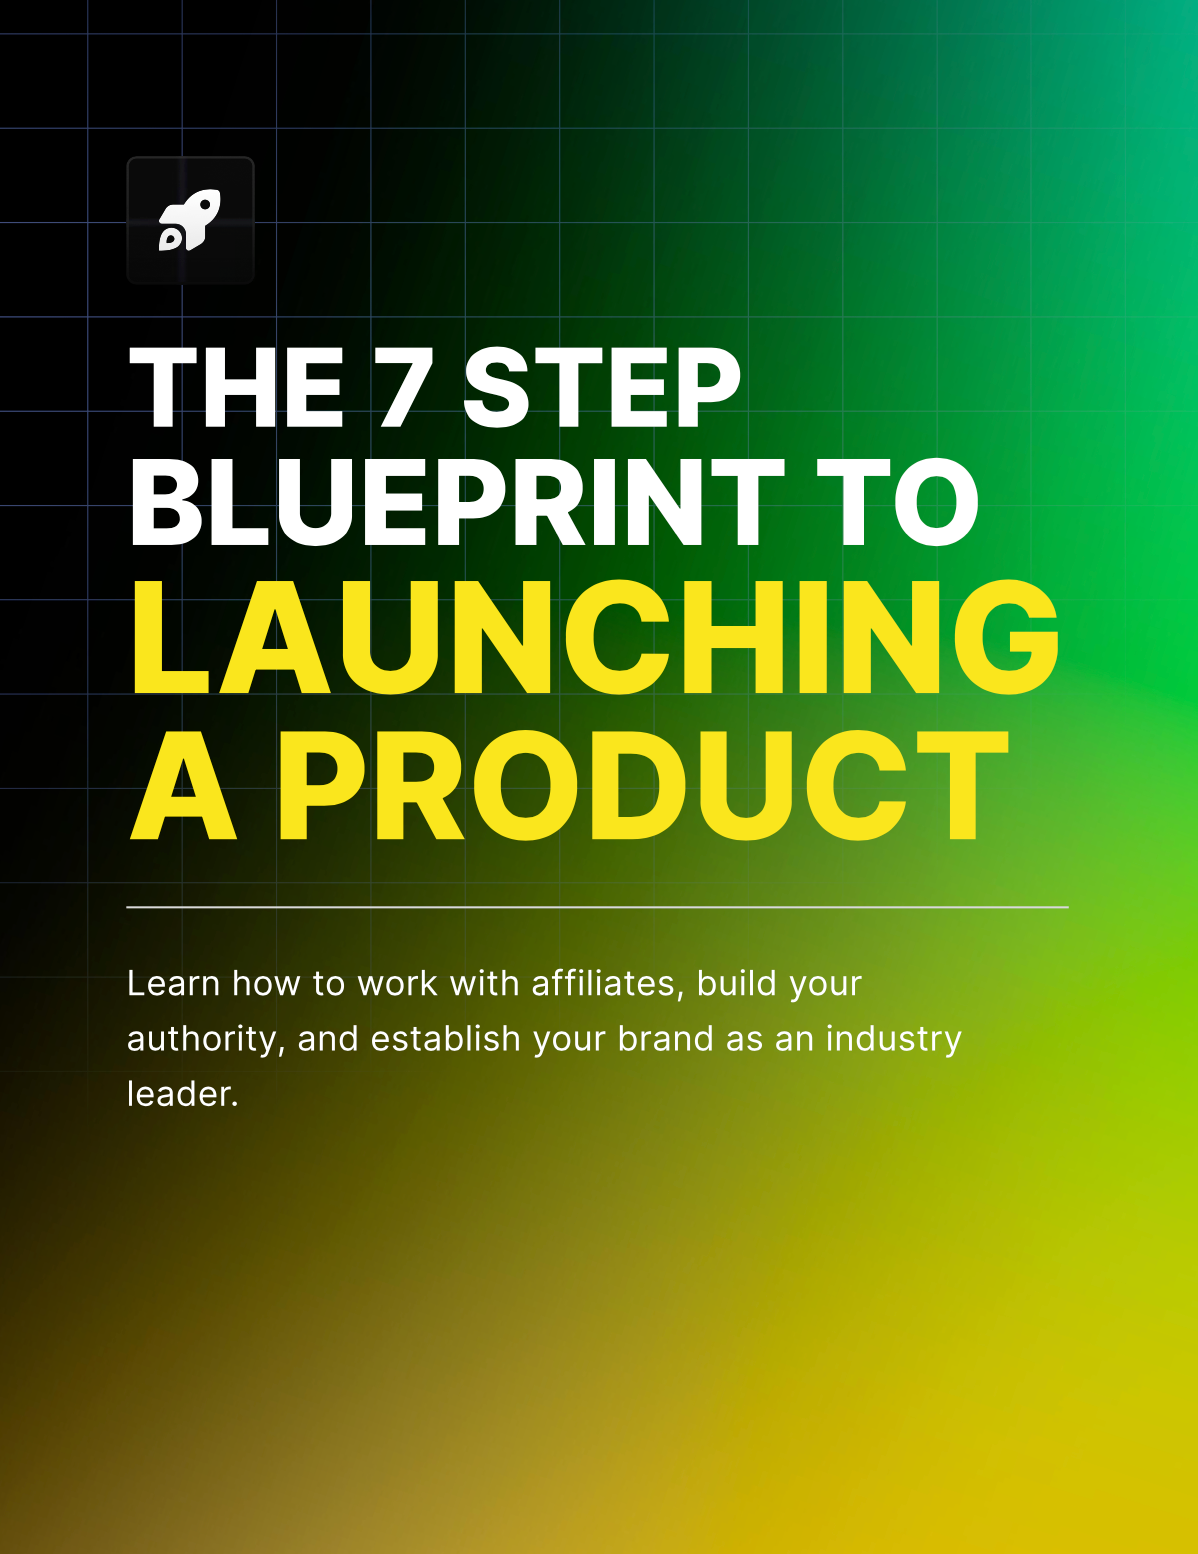 The 7 Step Blueprint to Launching a Product - EBook